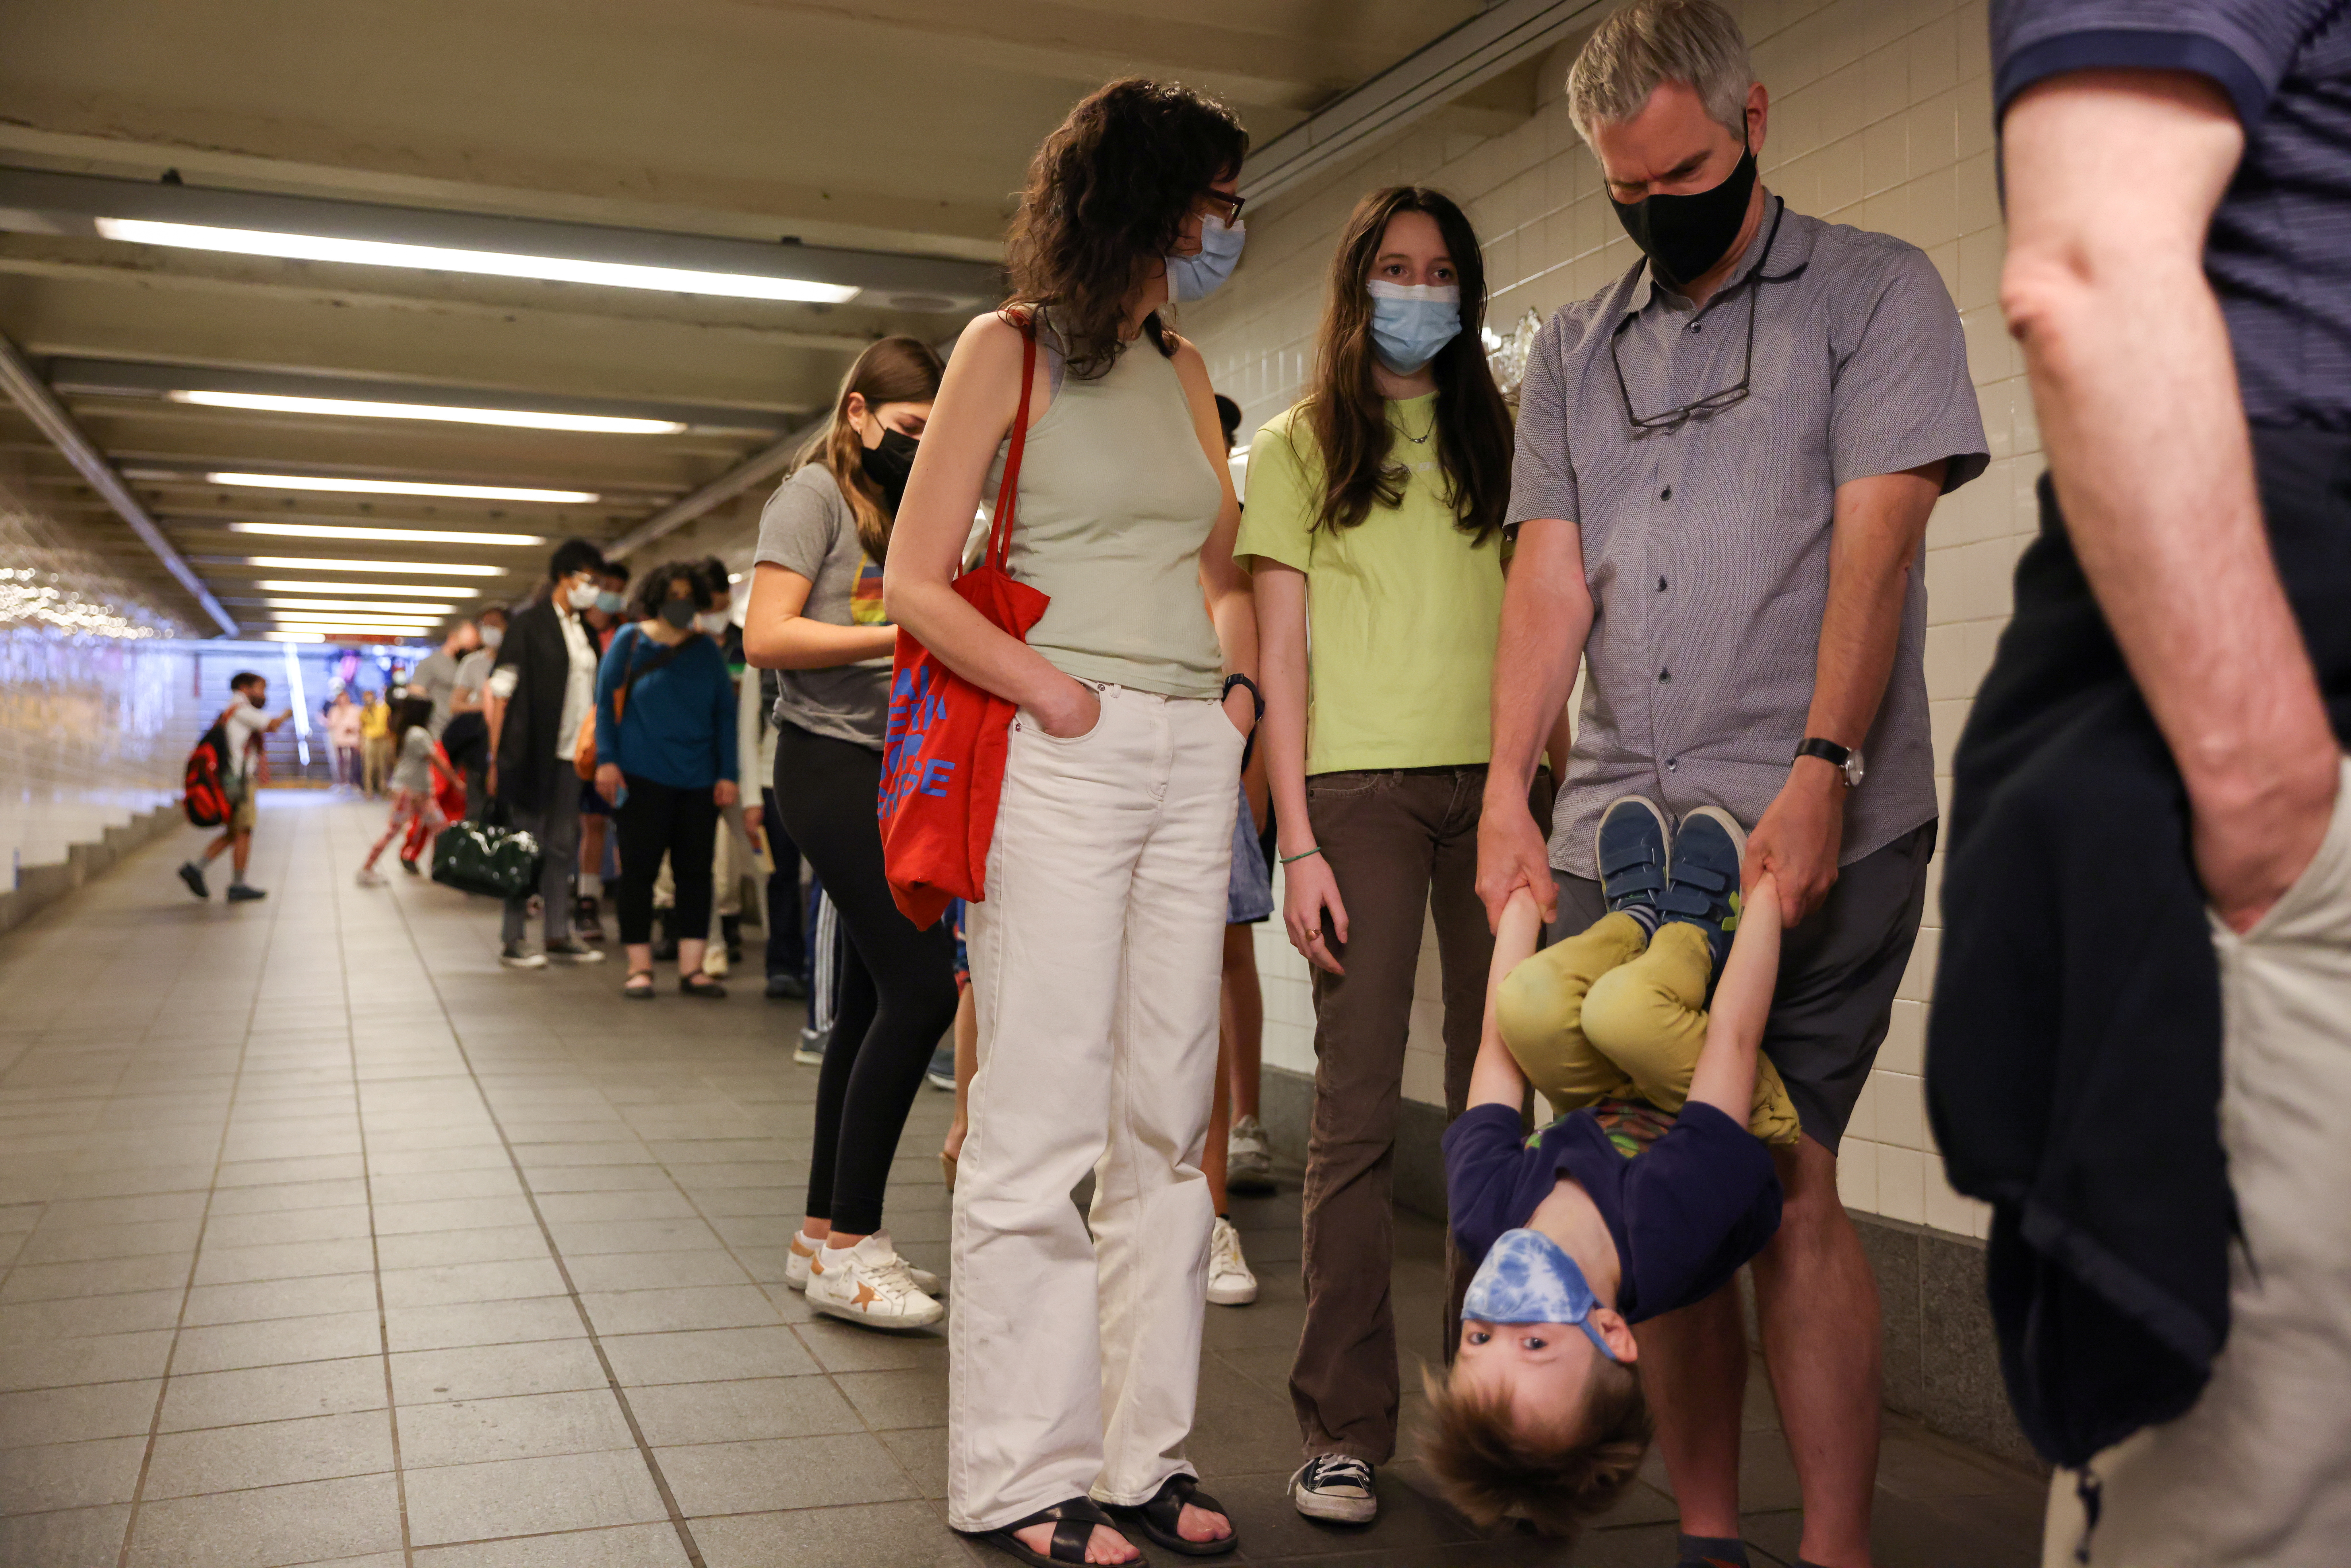 Jane Hassebroek waits in line to receive a COVID-19 vaccination outside the American Museum of Natural History with her family in Manhattan